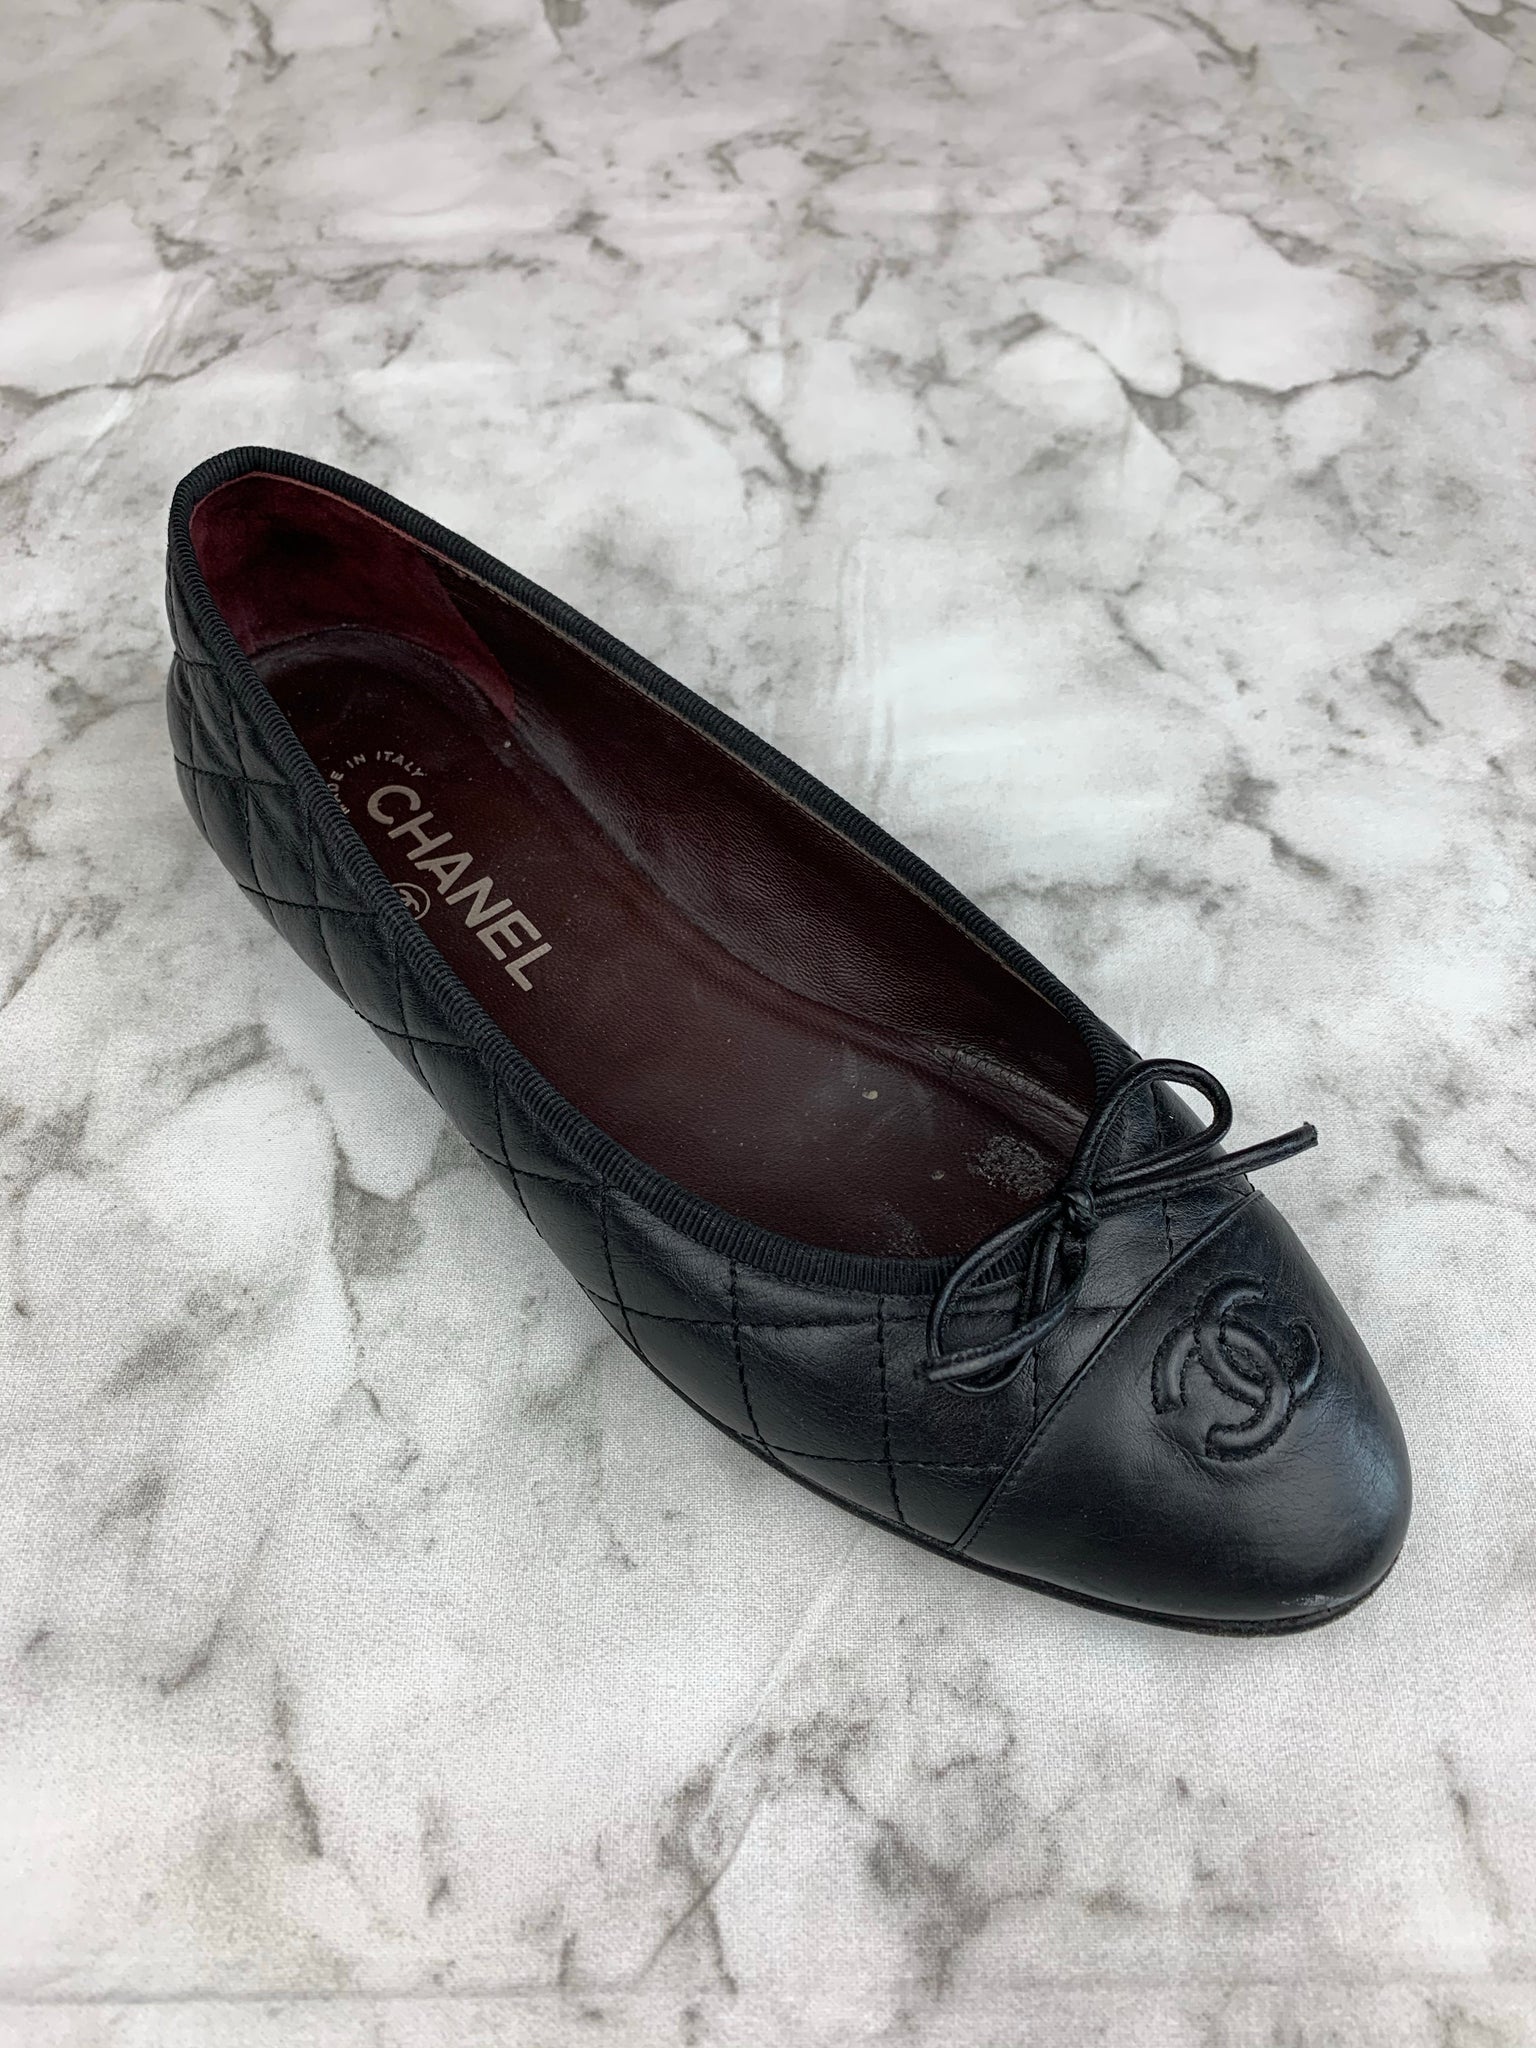 CHANEL Black Leather Quilt Cambon Ballet Flats Size 38 | 7.5 G24712